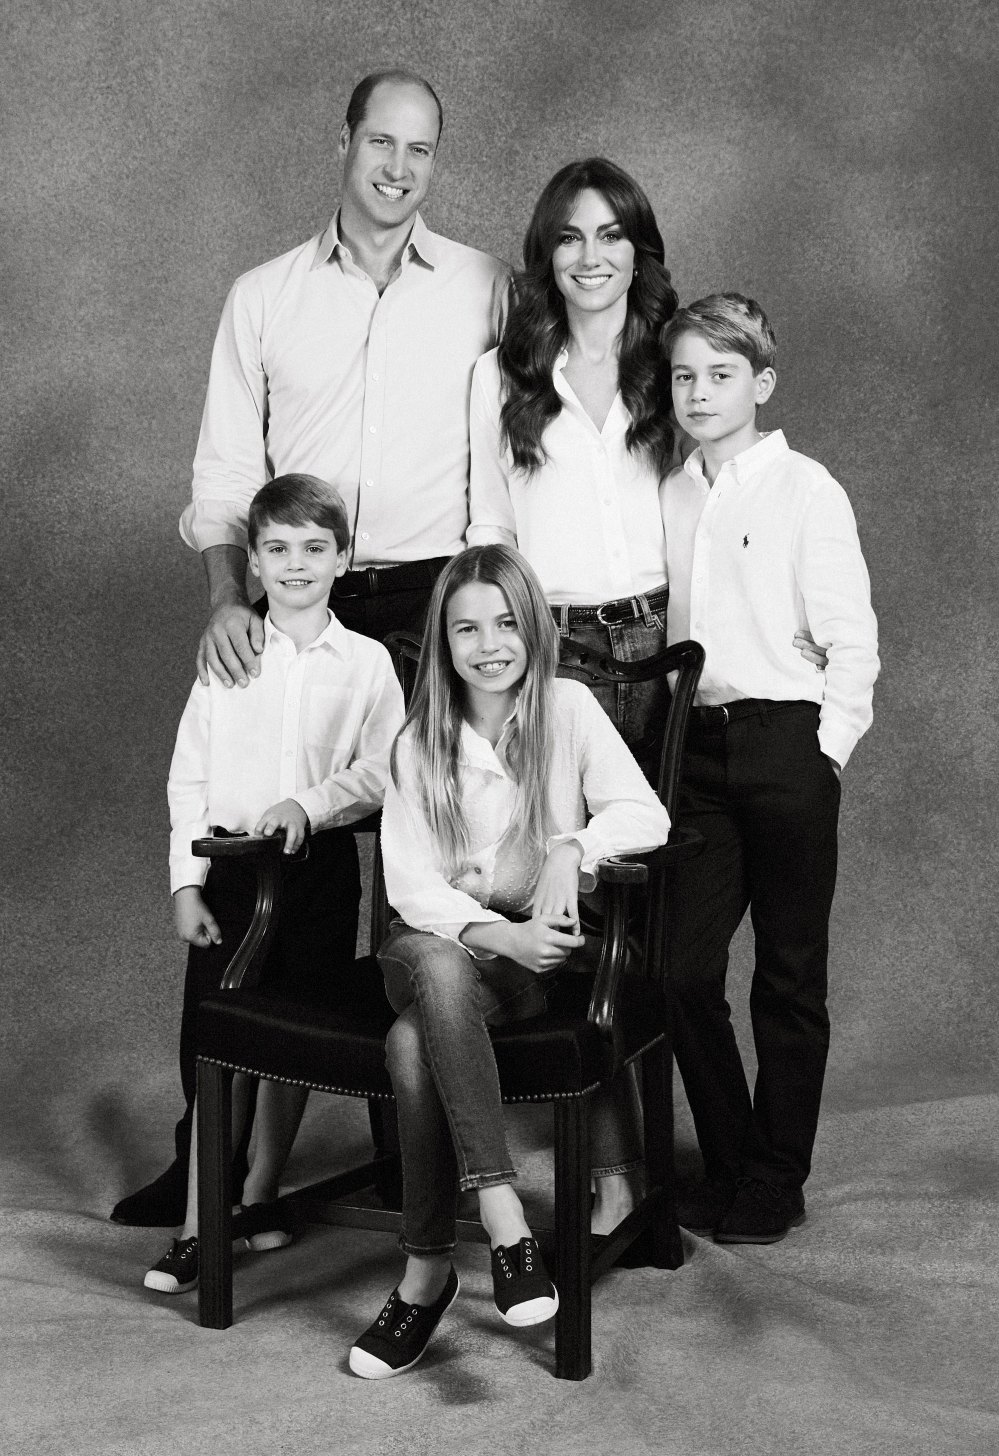 Prince William and Princess Kate Are Focusing on Their Nuclear Family for Christmas Their Plans 279